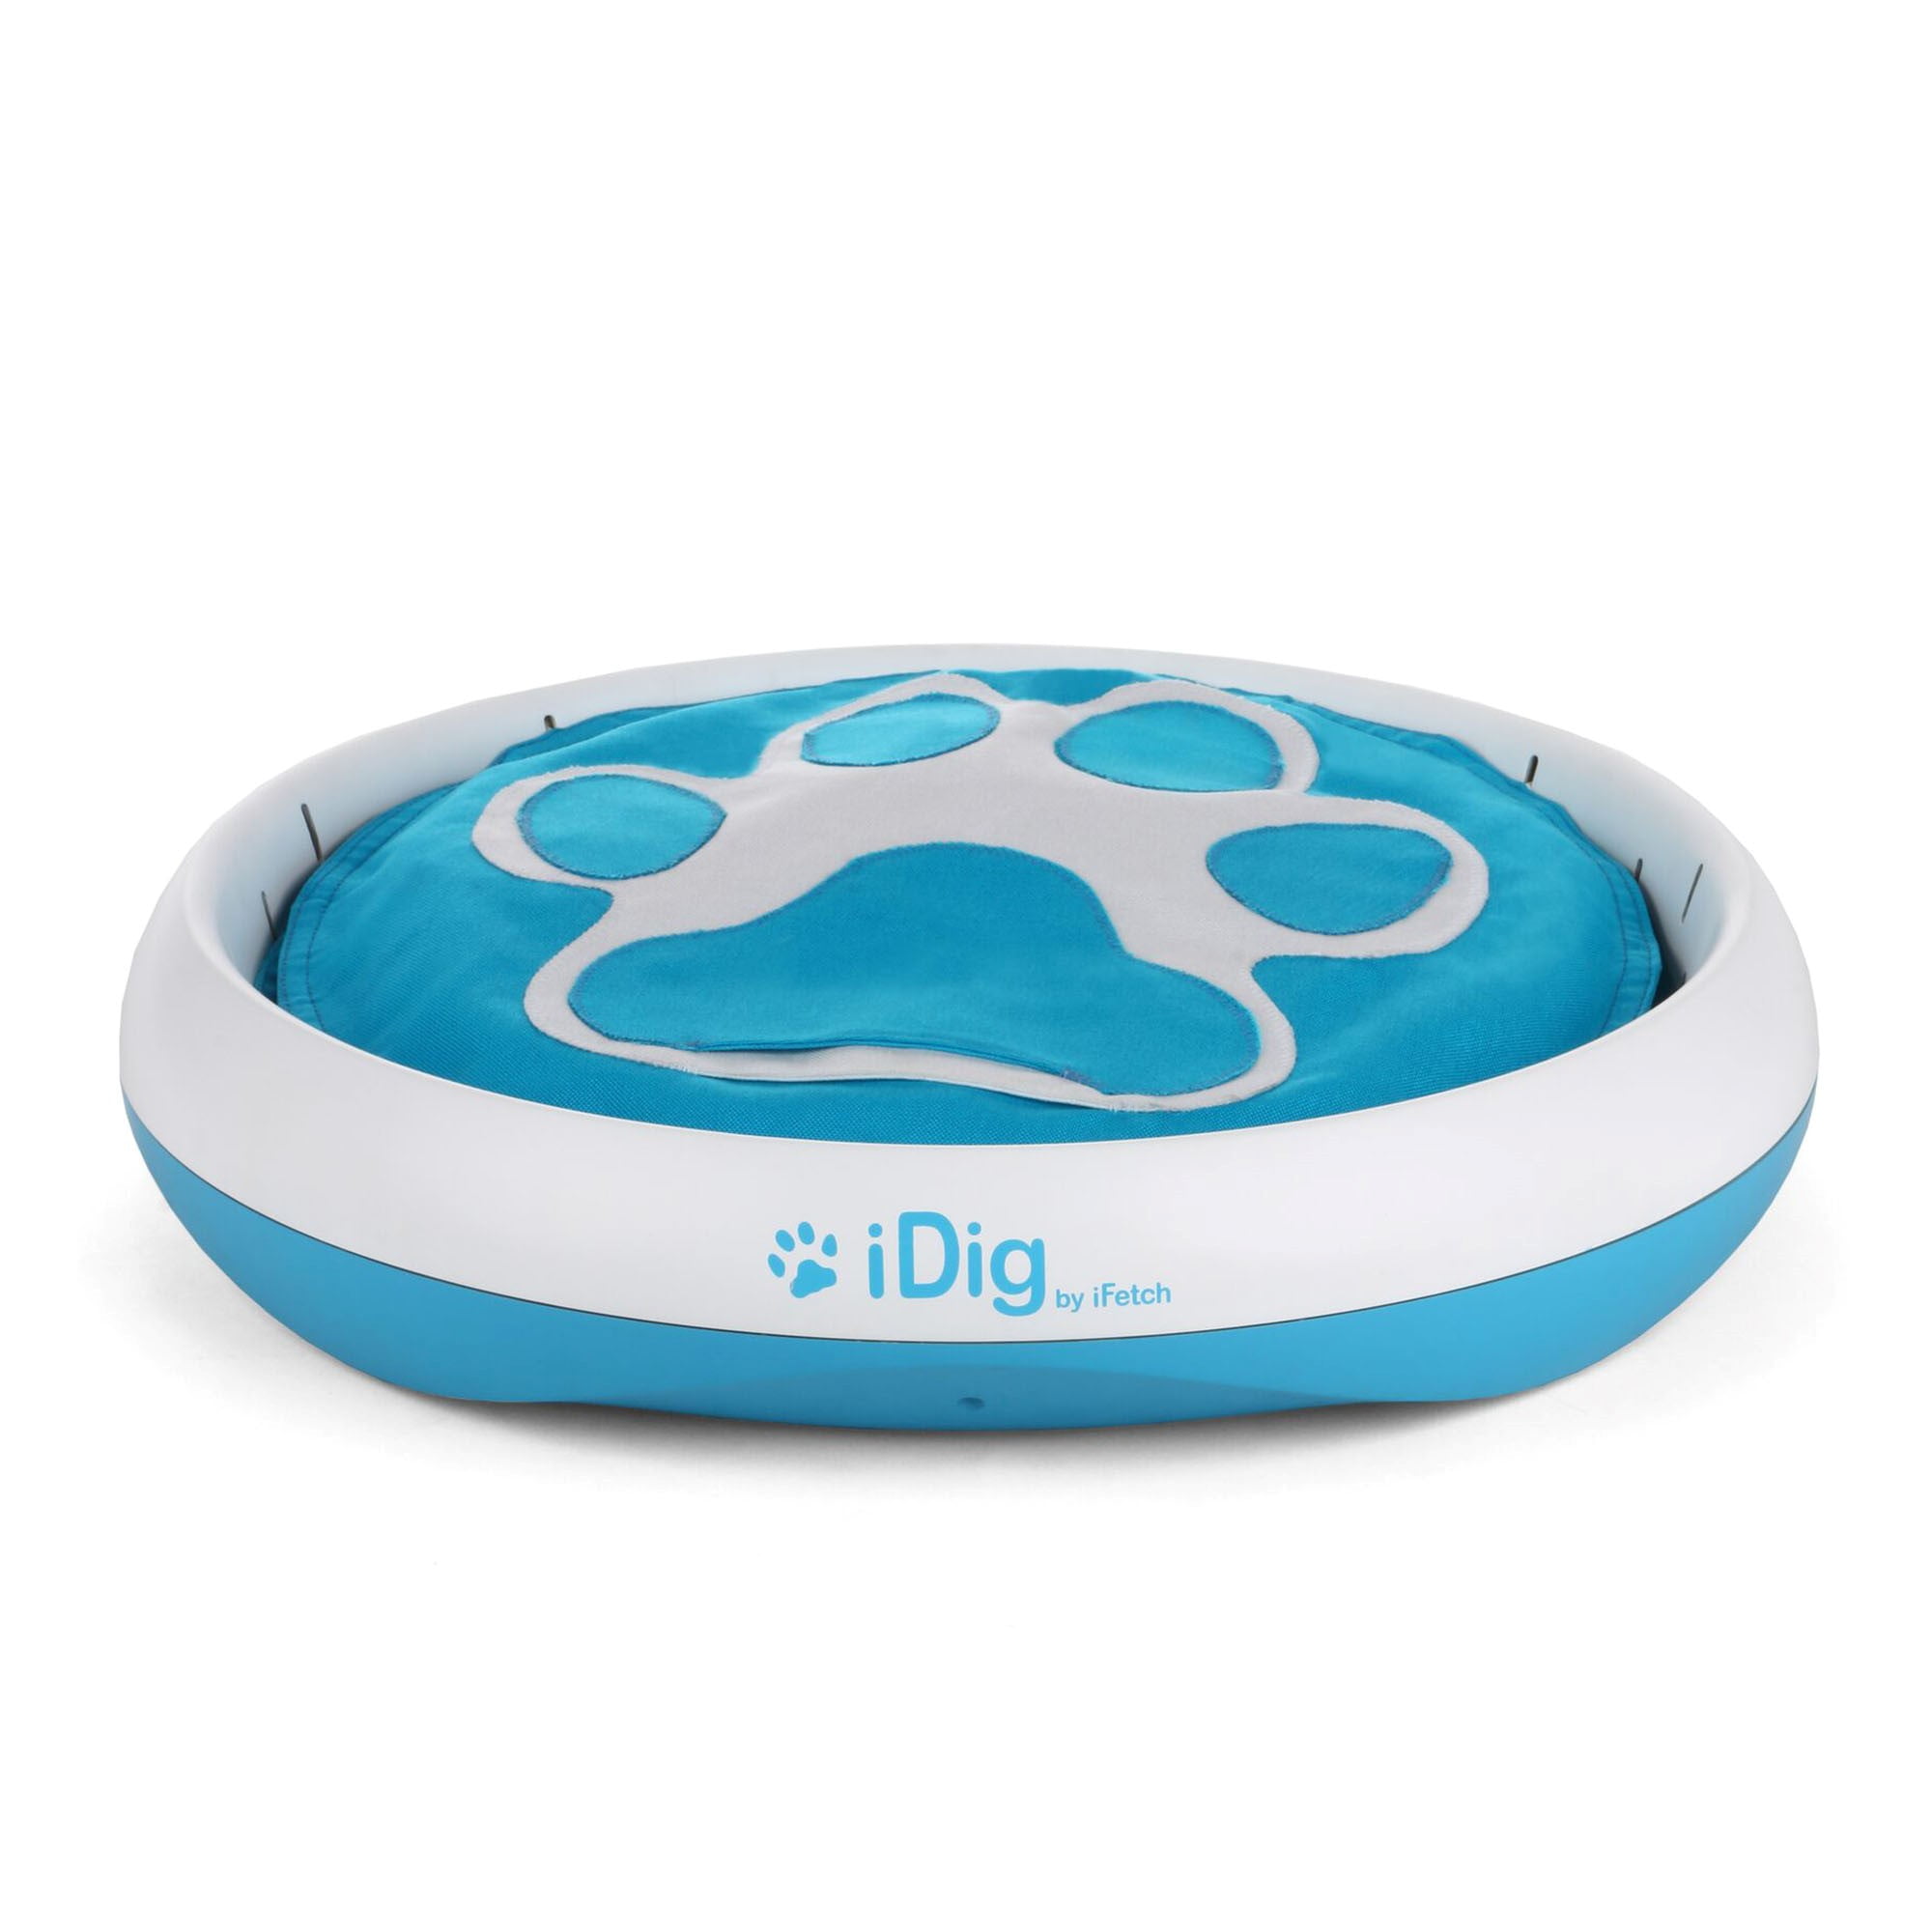 Pet Supplies : iDig Go Digging Toy from iFetch Digging Dog Breeds